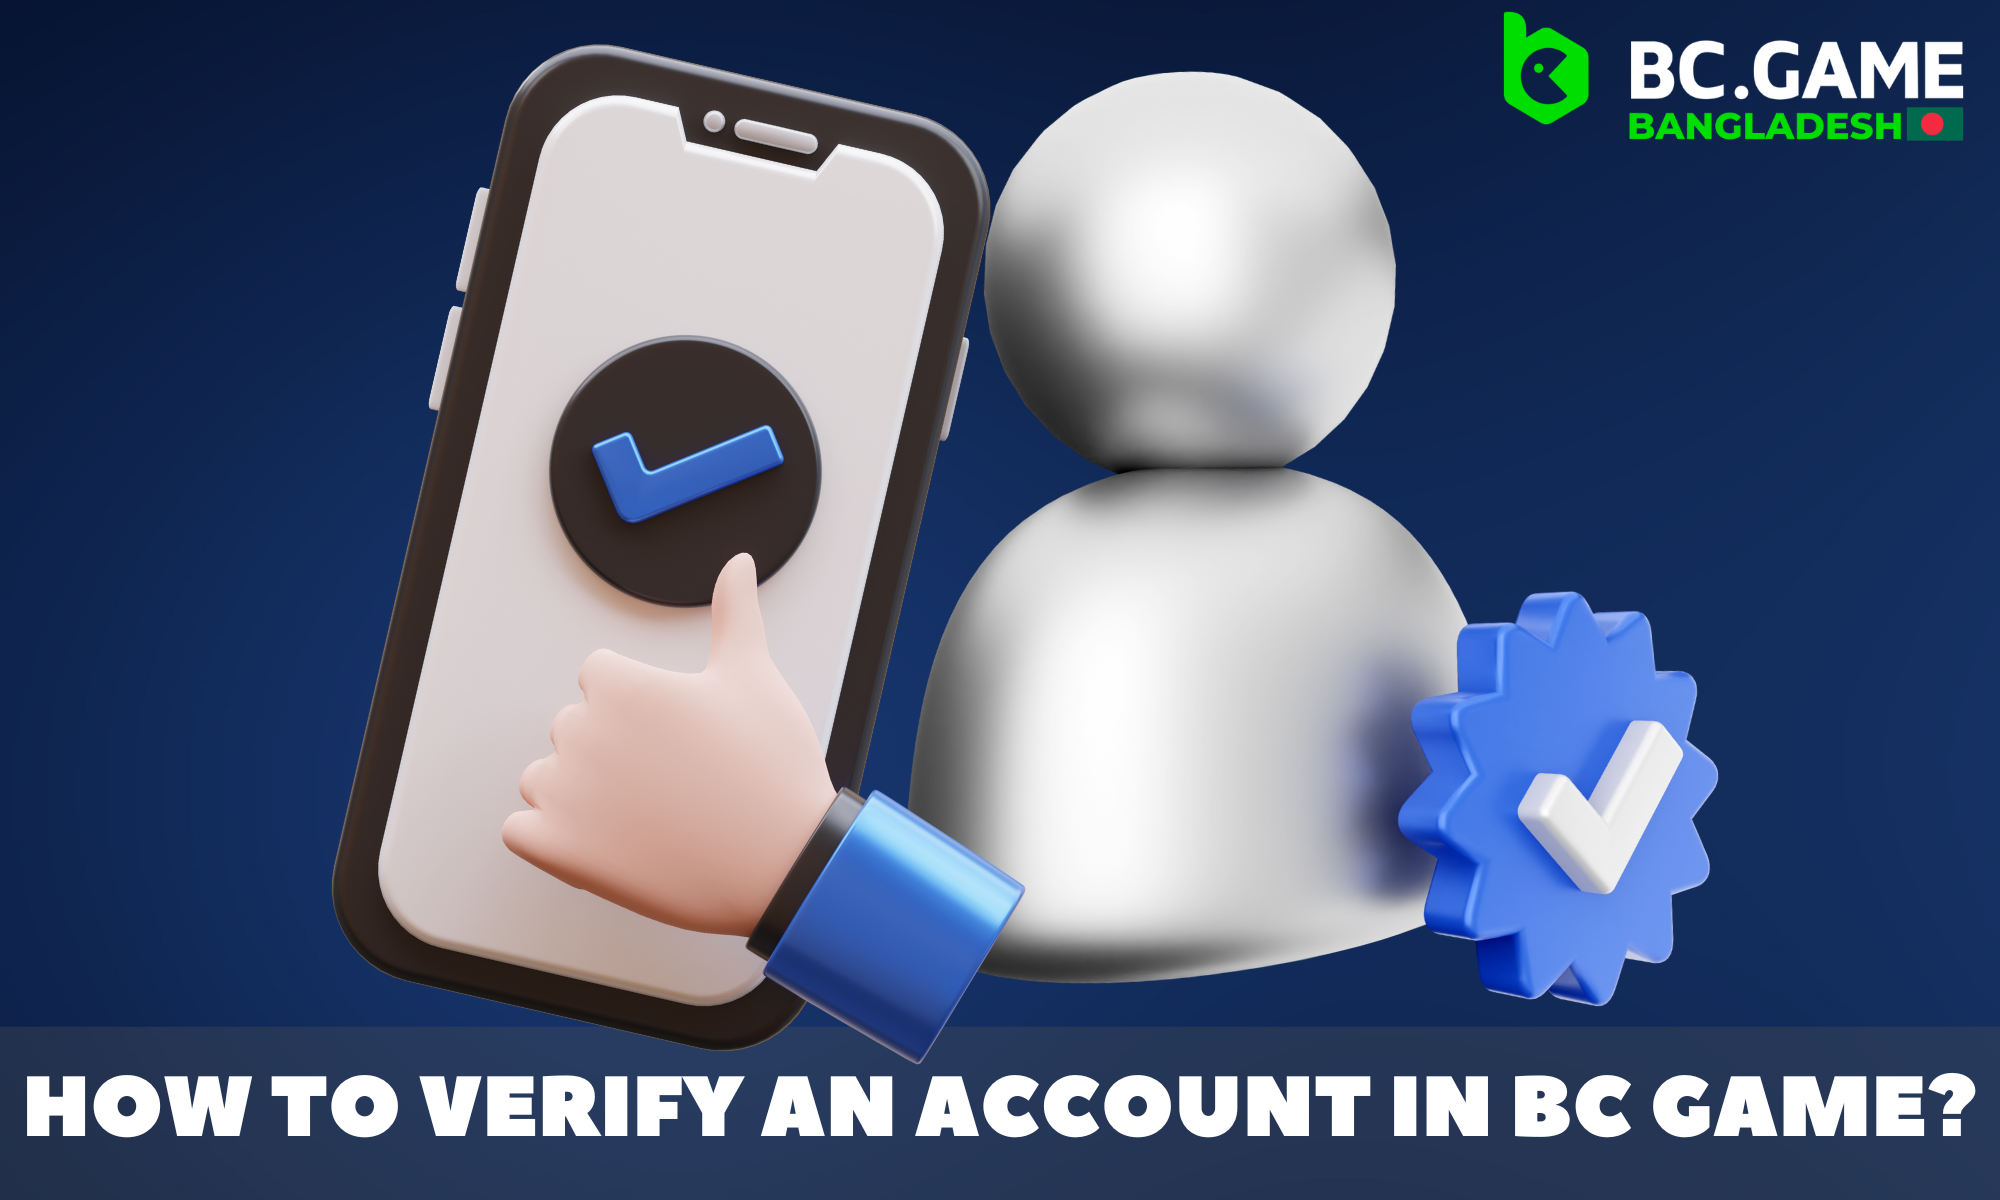 In BC Game, account verification is required to start playing